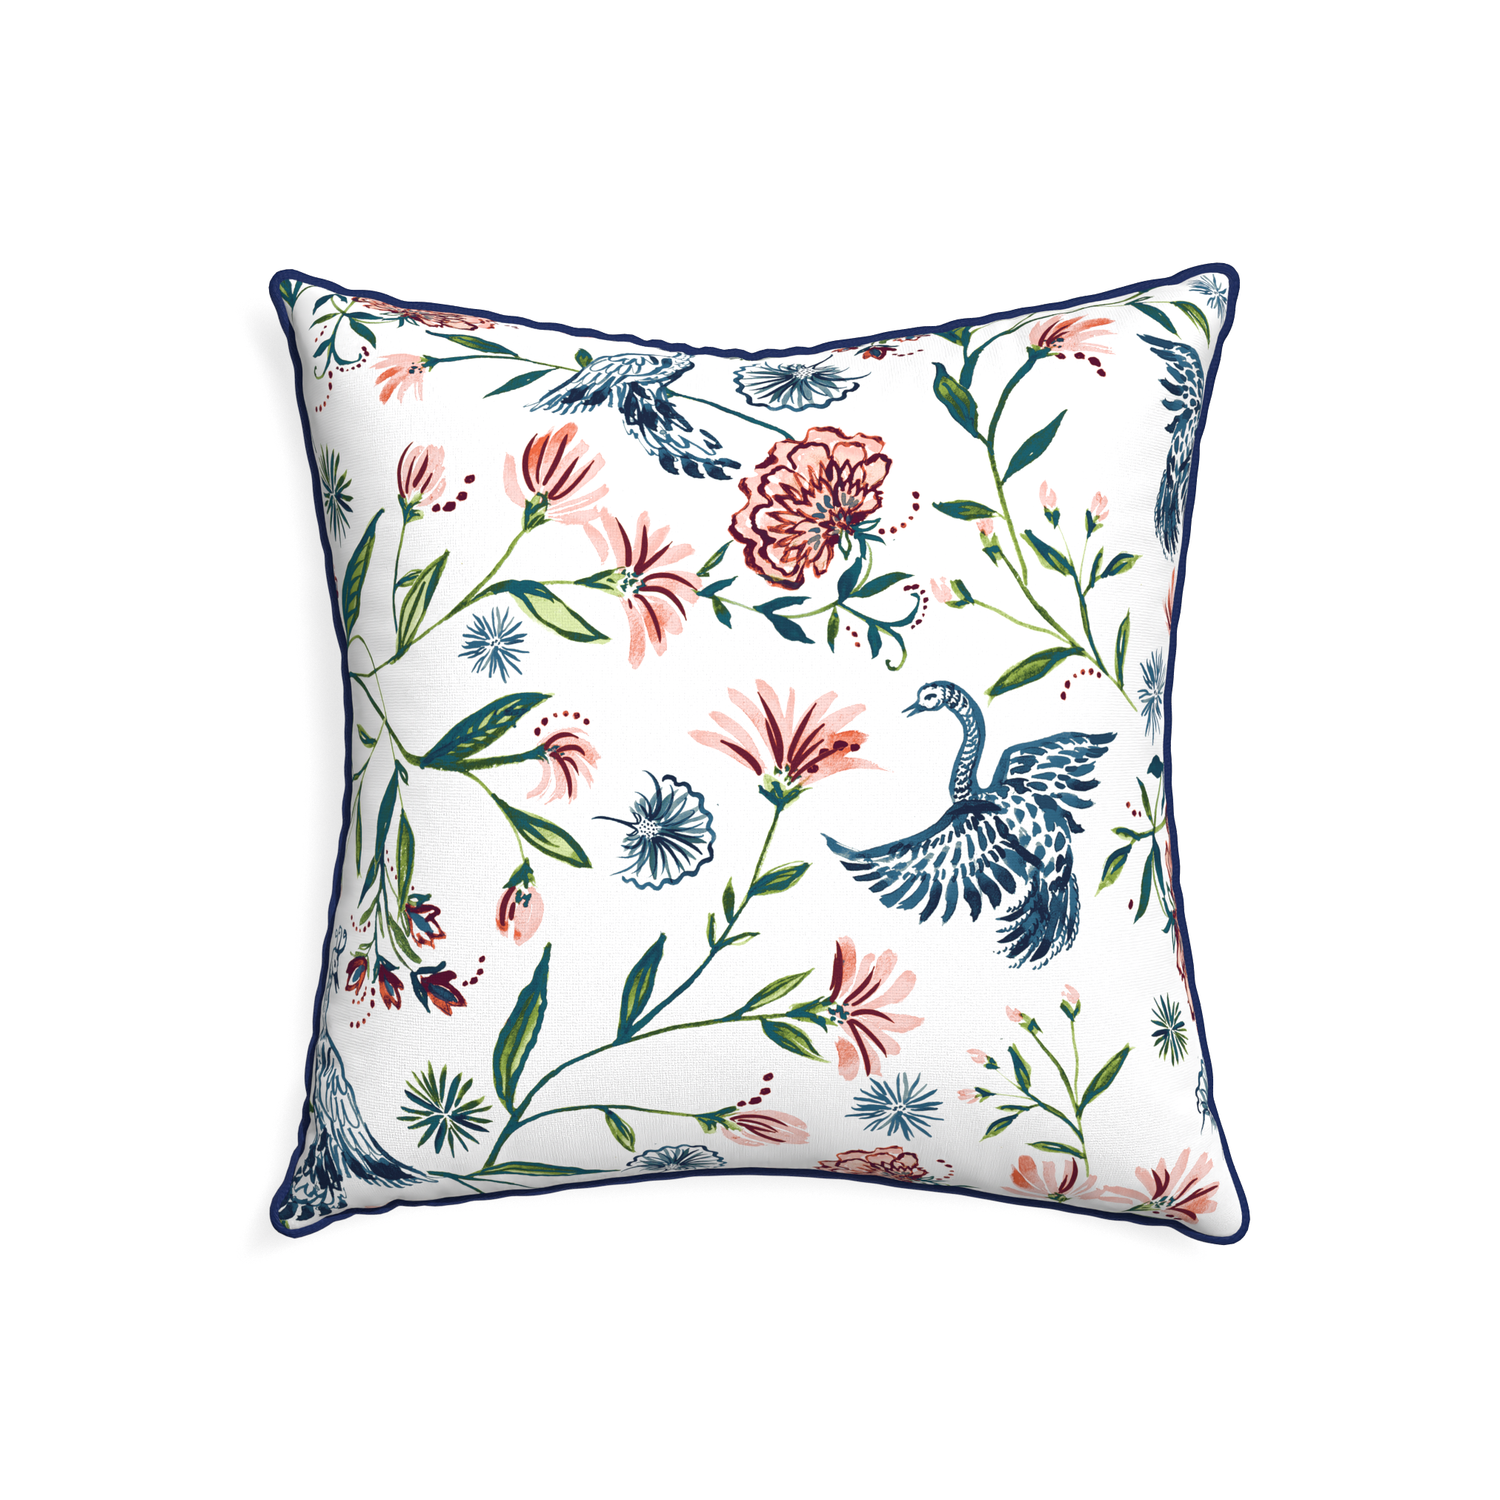 22-square daphne cream custom pillow with midnight piping on white background